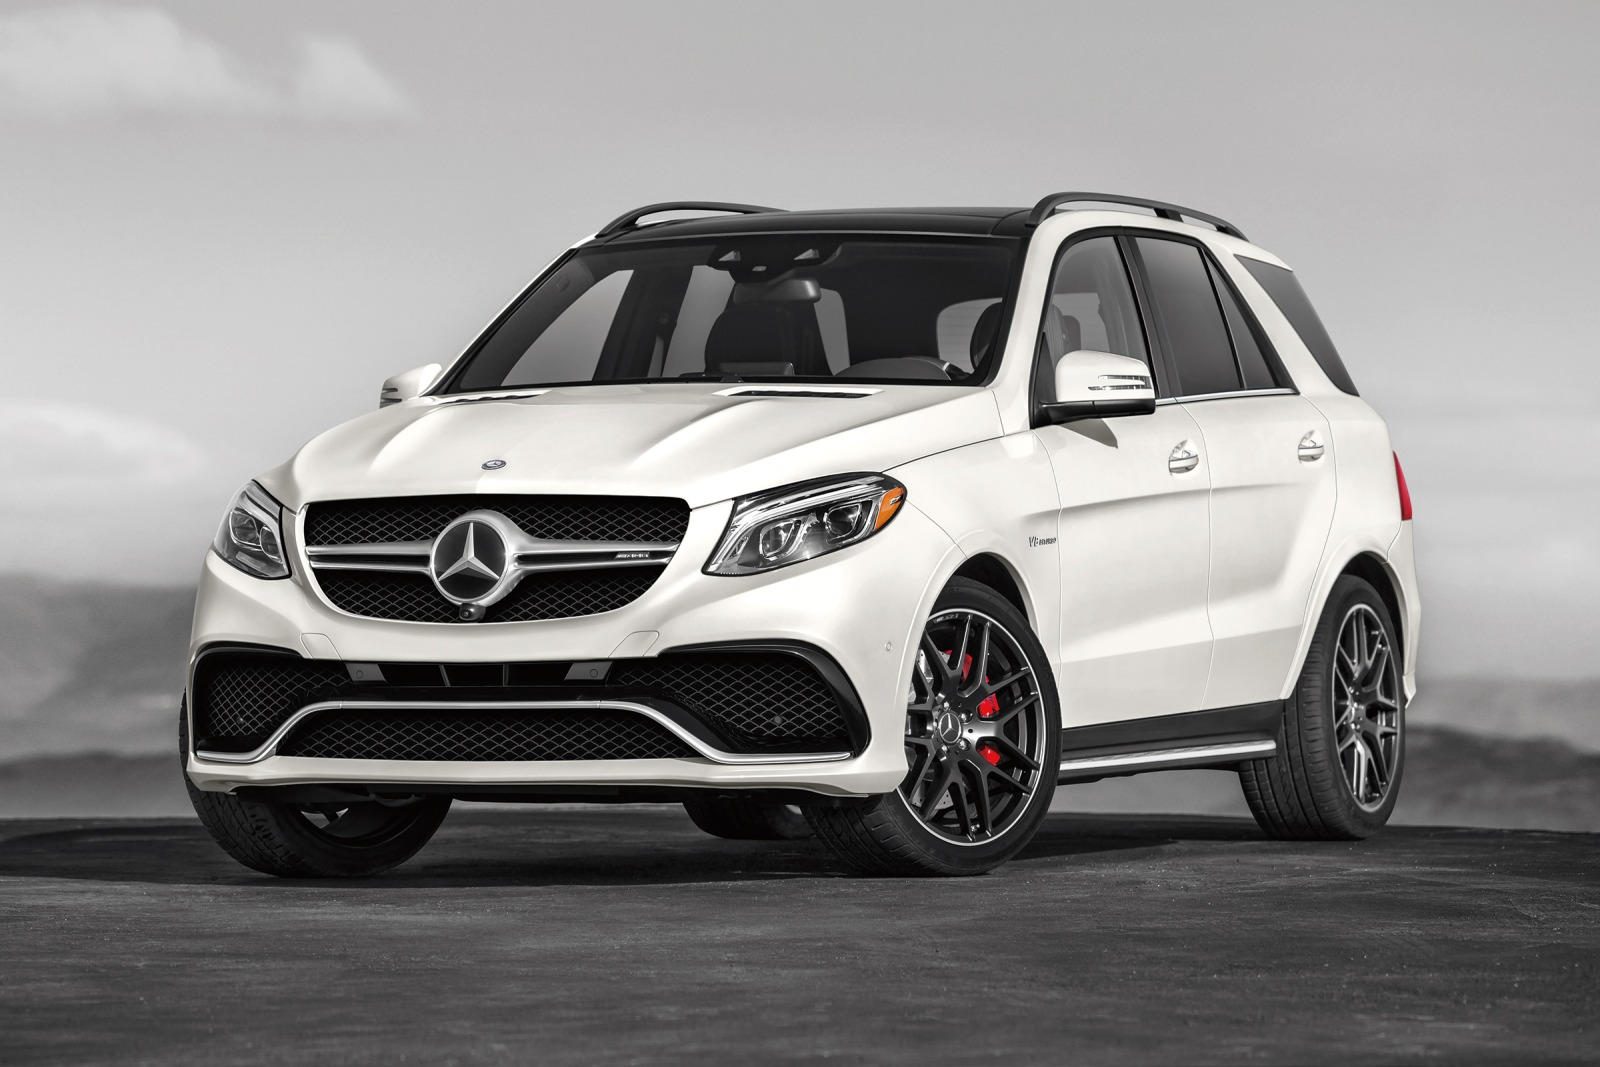 2017 Mercedes-AMG GLE 63 SUV Front Angle View